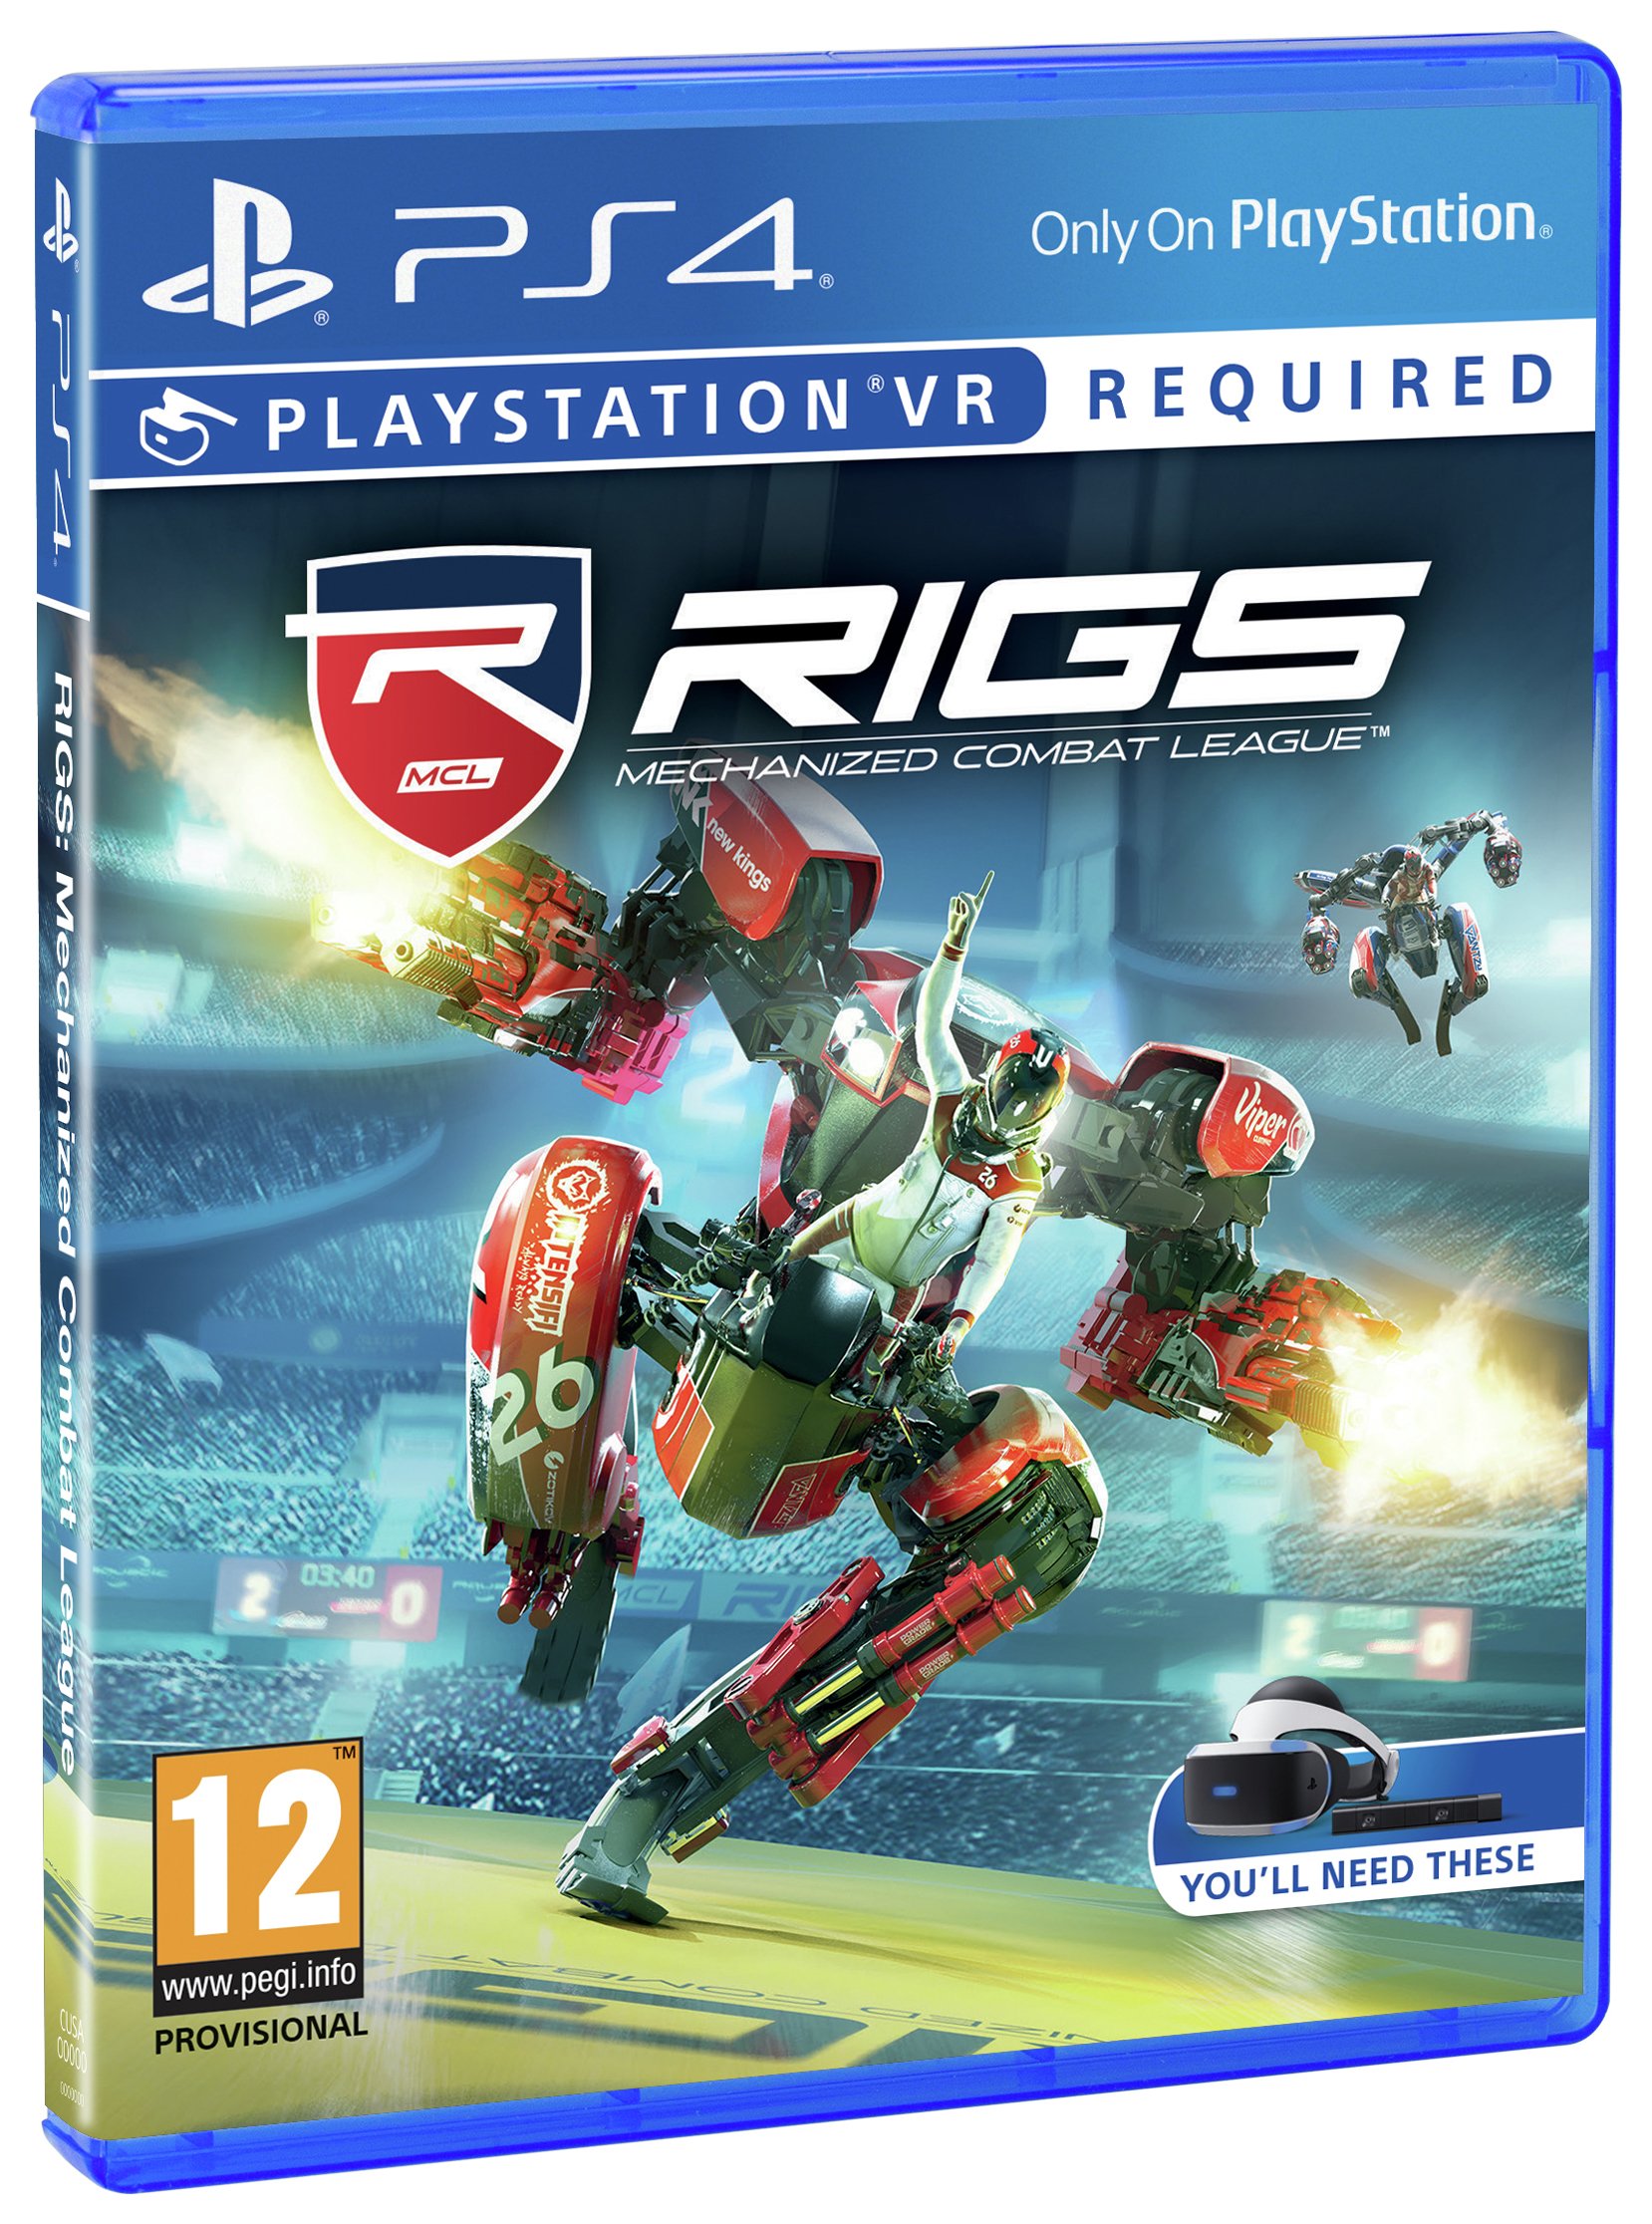 RIGS: Mechanised Combat League PS4 Game. Review